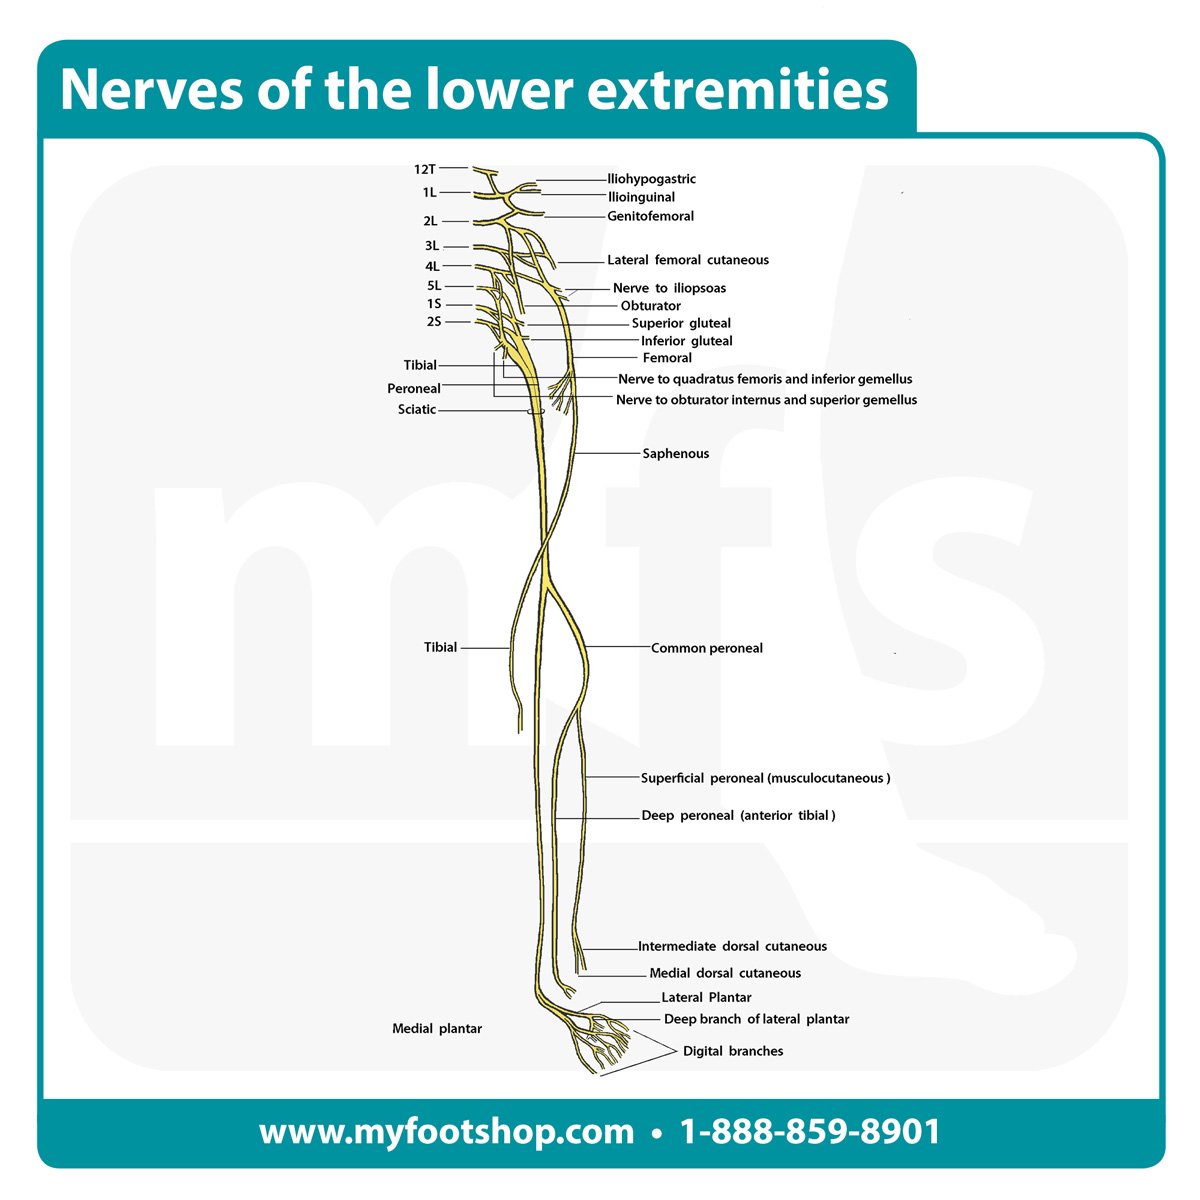 image of the nerves of the lower extremities